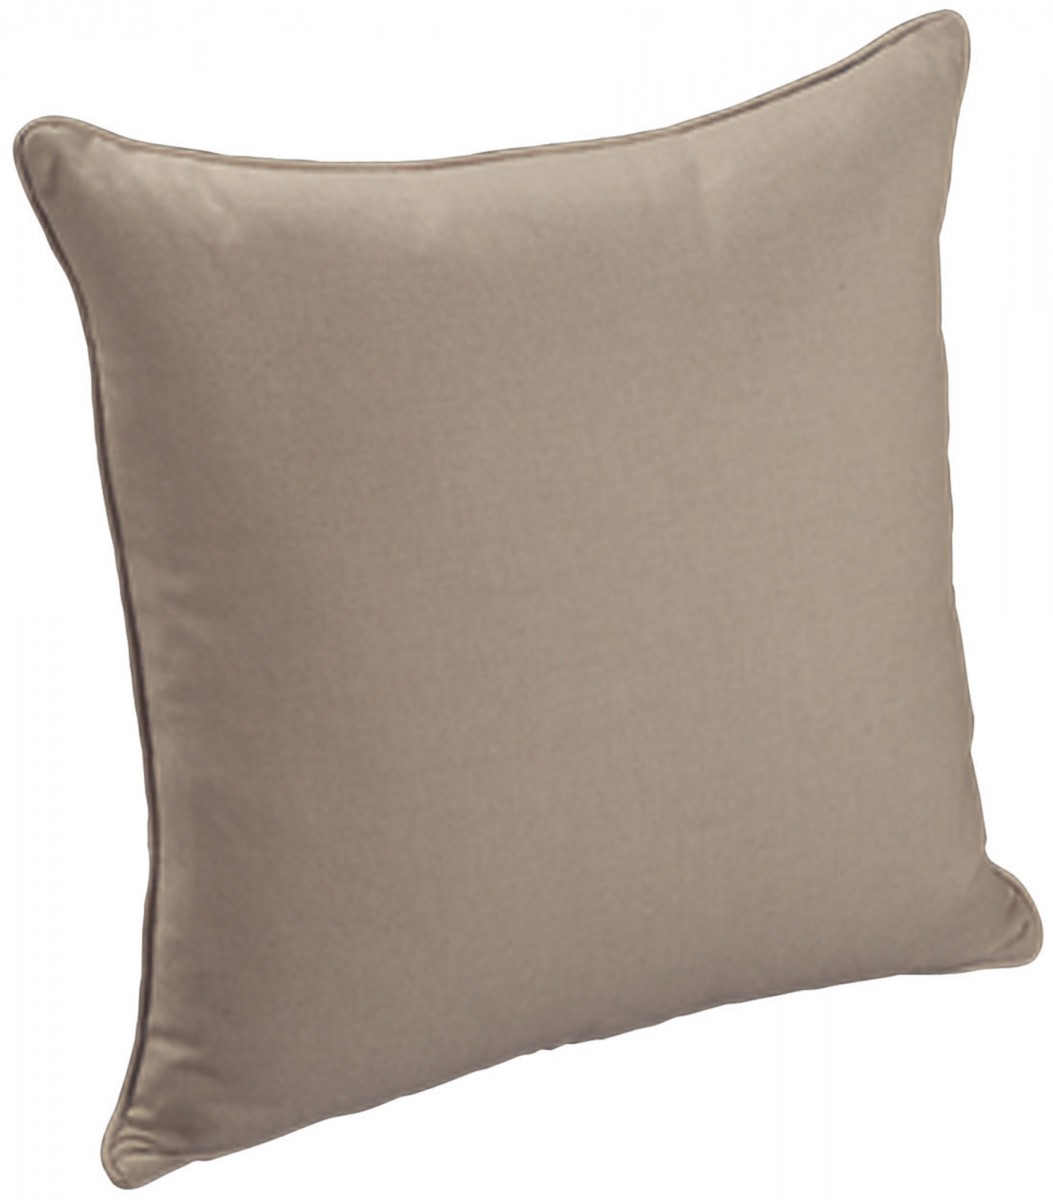 Throw Pillows Knife Edge Square with Welt 22" | Highlight image